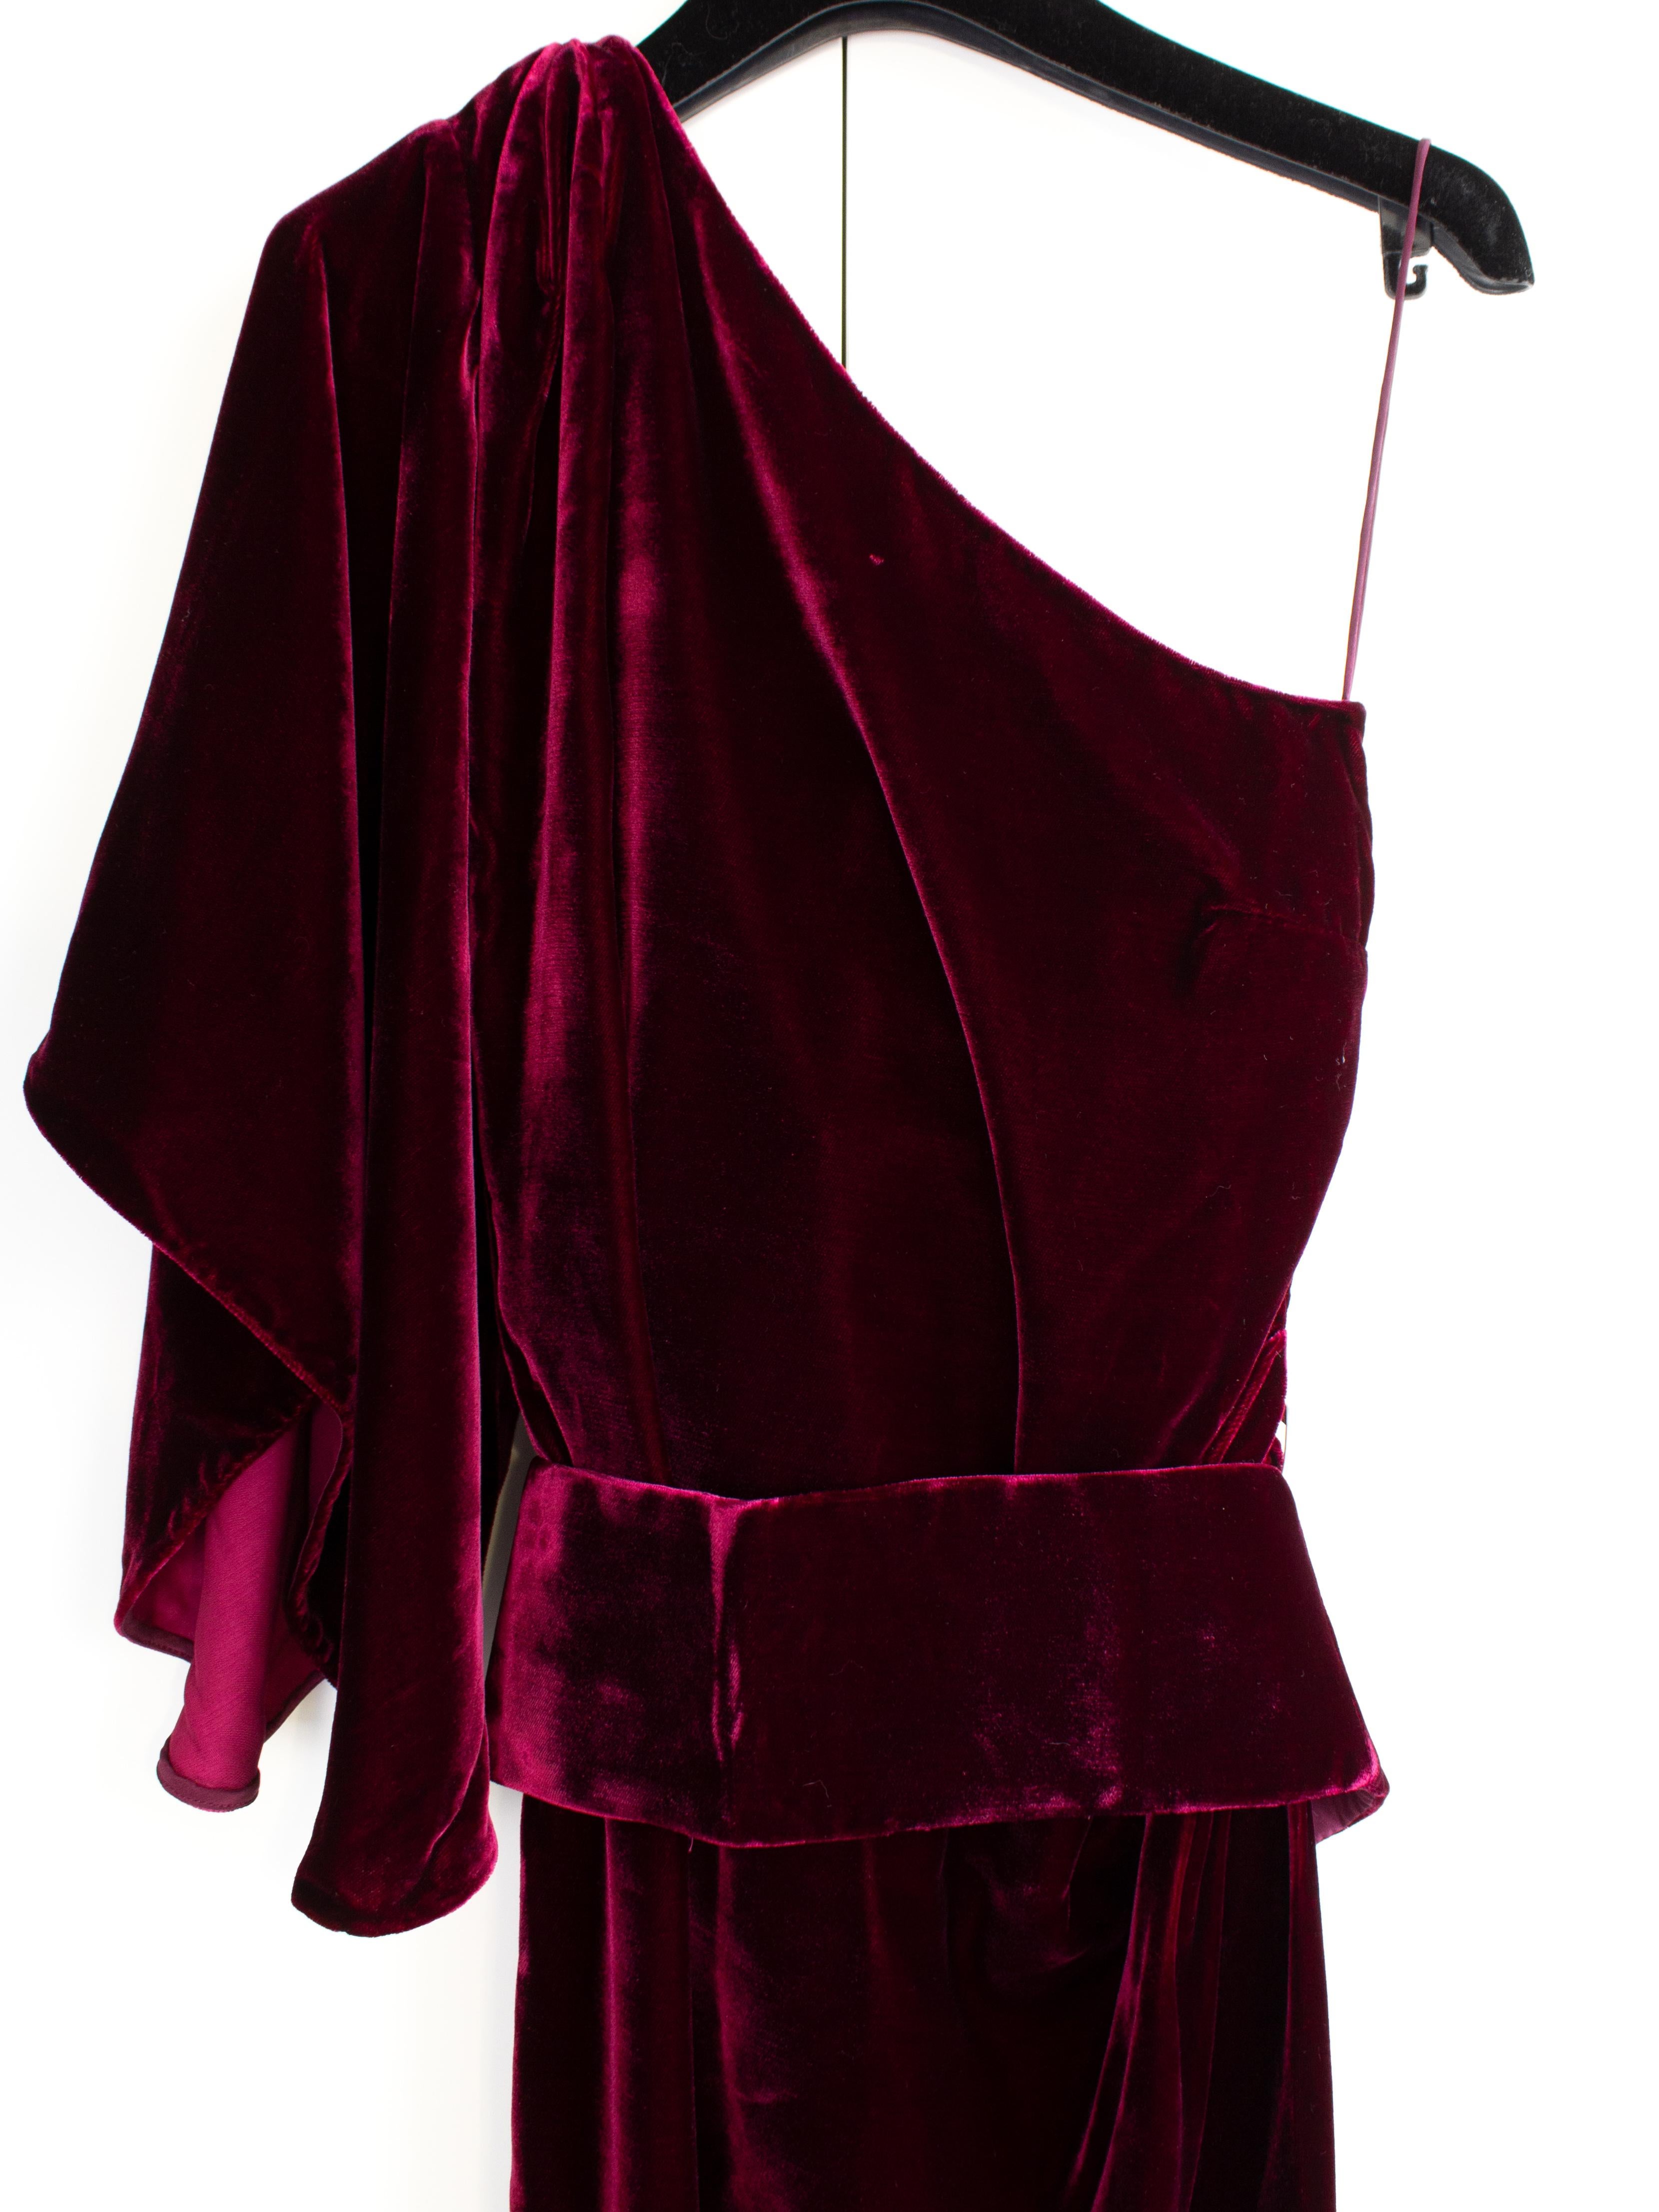 $6500 Ralph&Russo Red Carpet Lady Gaga Wine Red Burgundy Belted Velvet Ava Gown 6